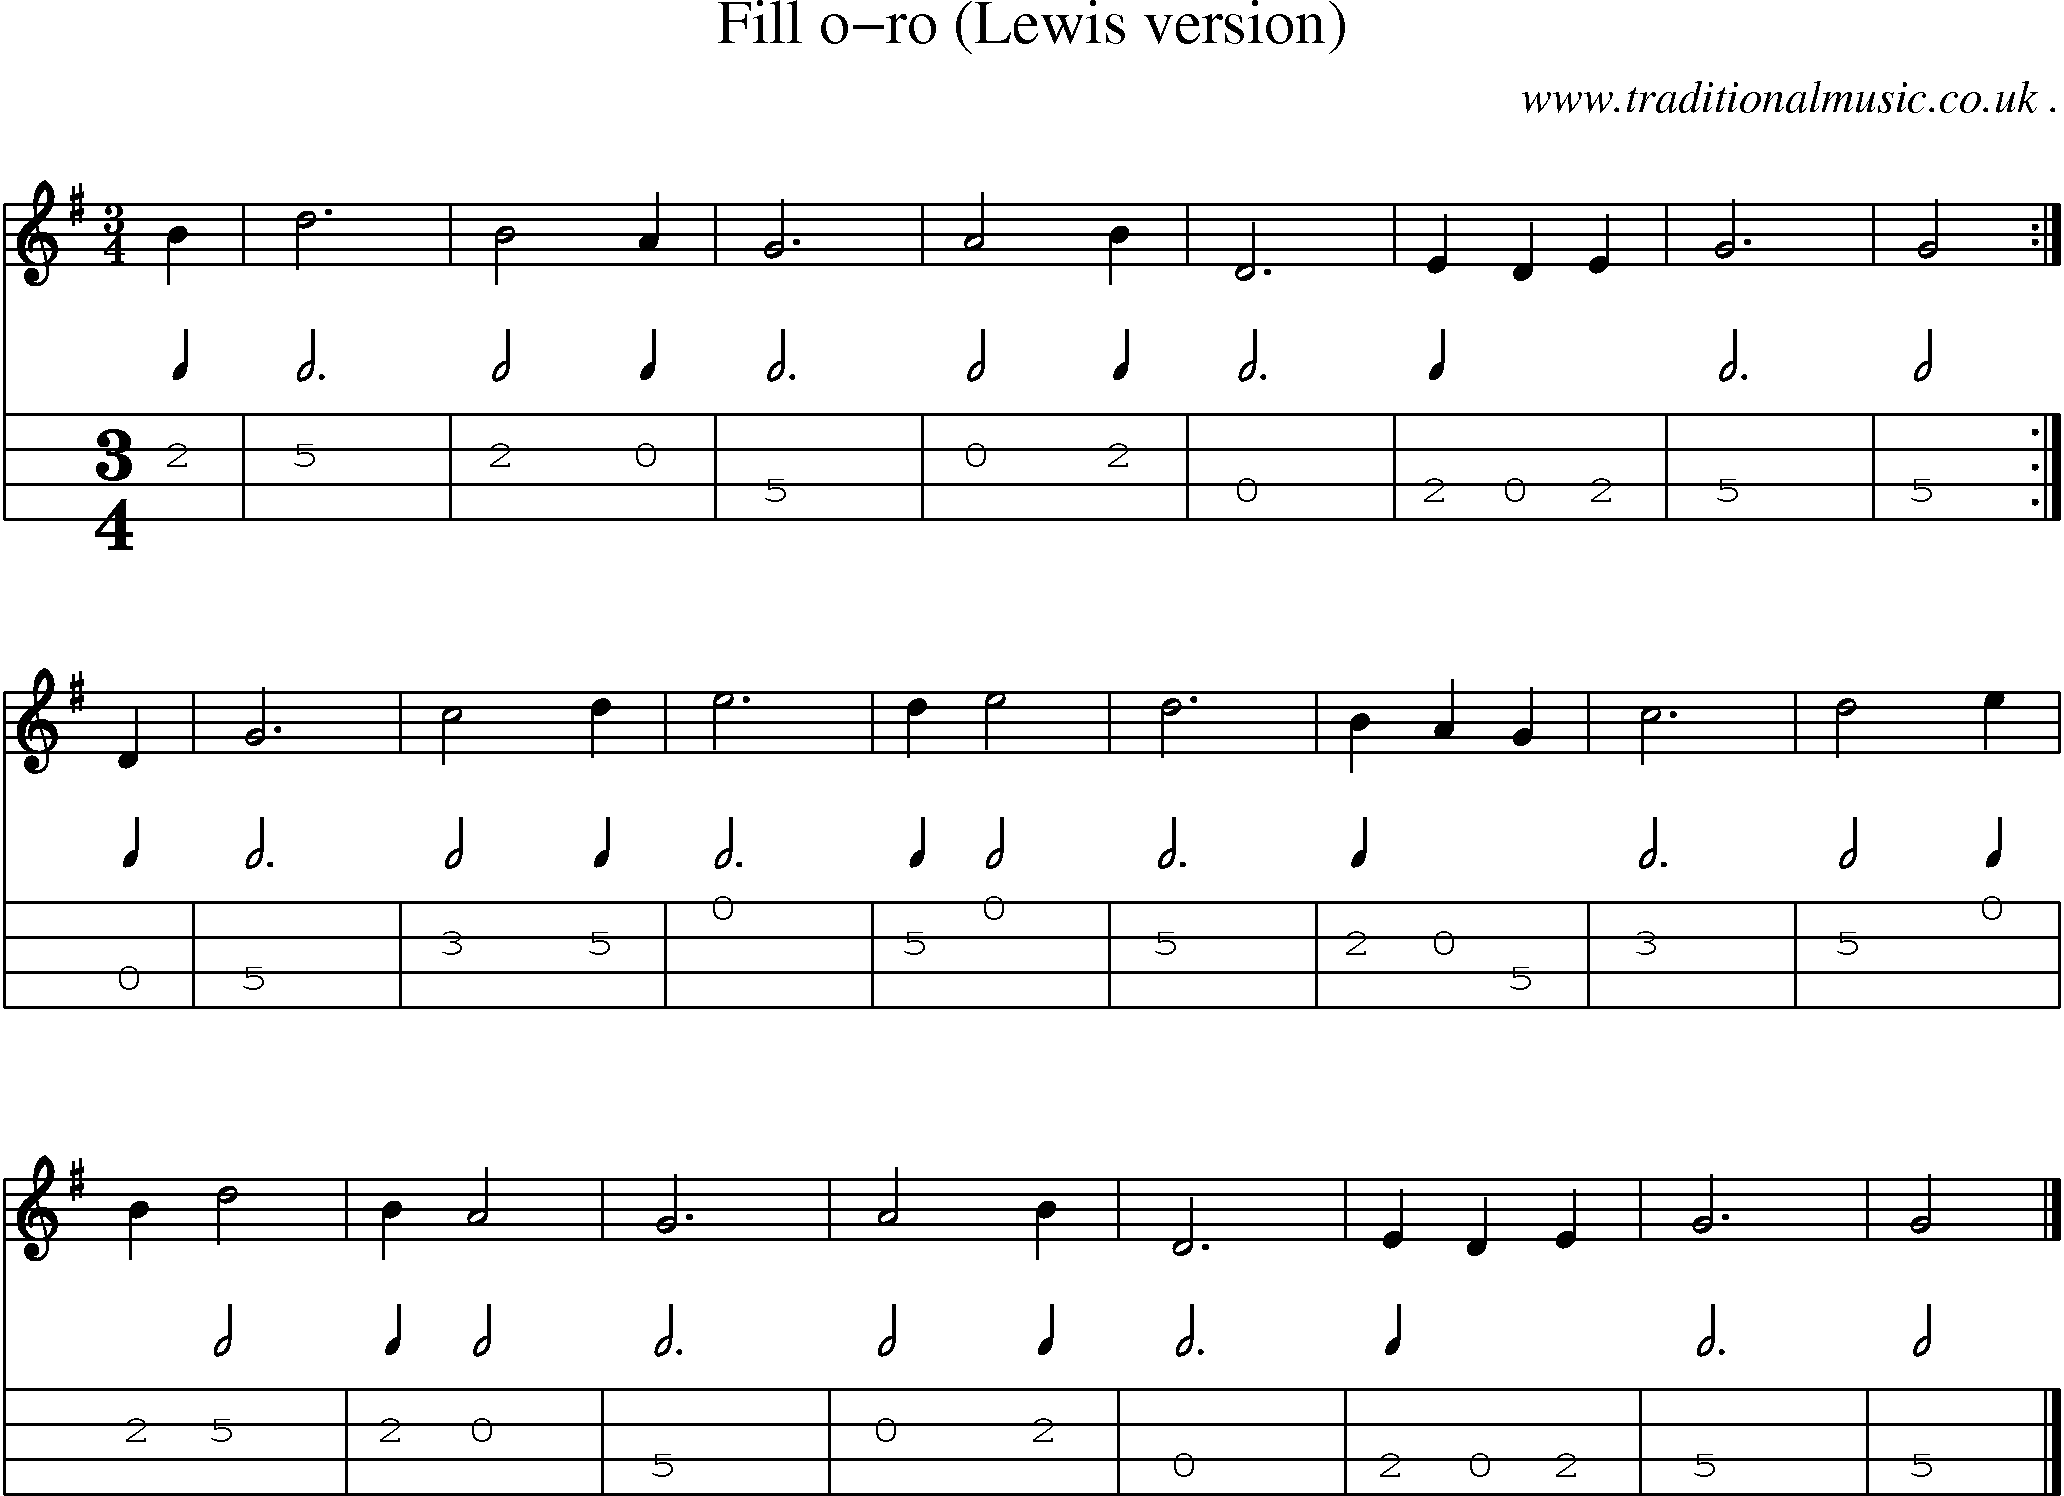 Sheet-music  score, Chords and Mandolin Tabs for Fill O-ro Lewis Version